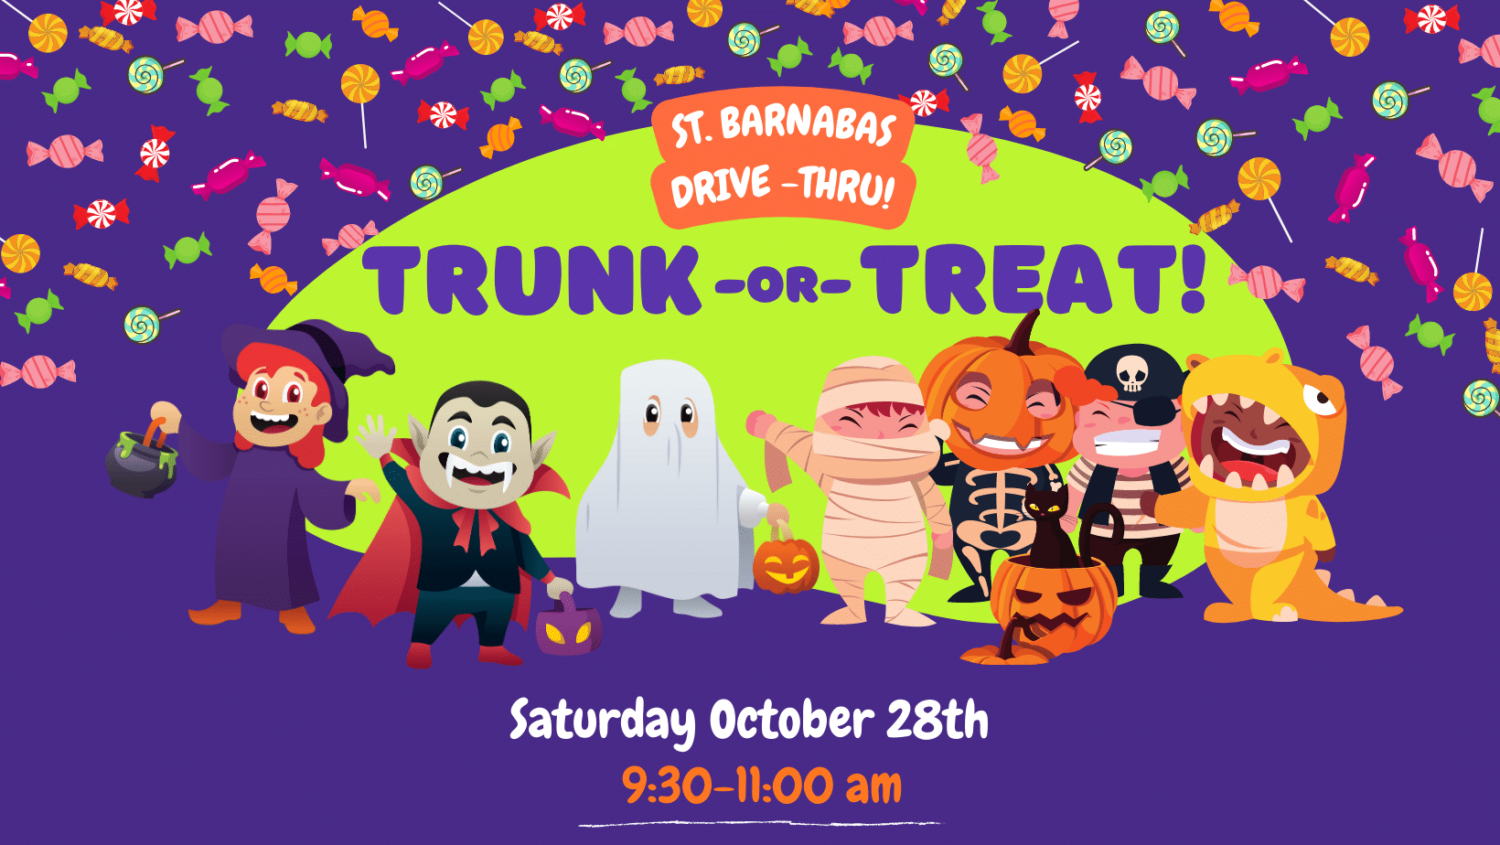 Trunk or Treat Facebook Cover11 1500x845